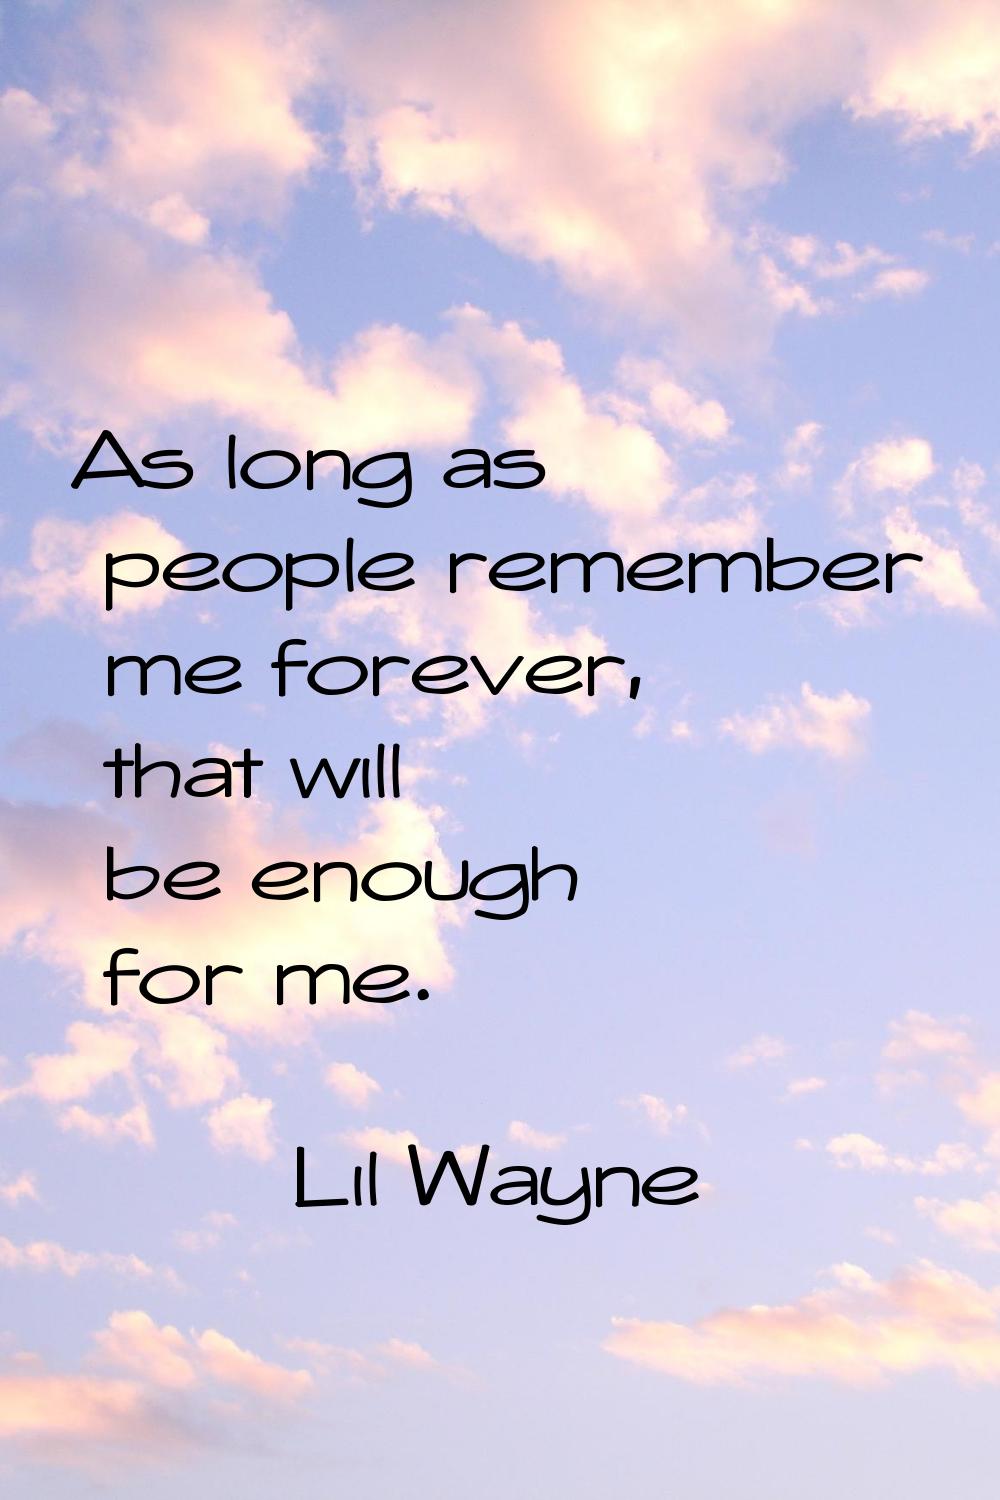 As long as people remember me forever, that will be enough for me.